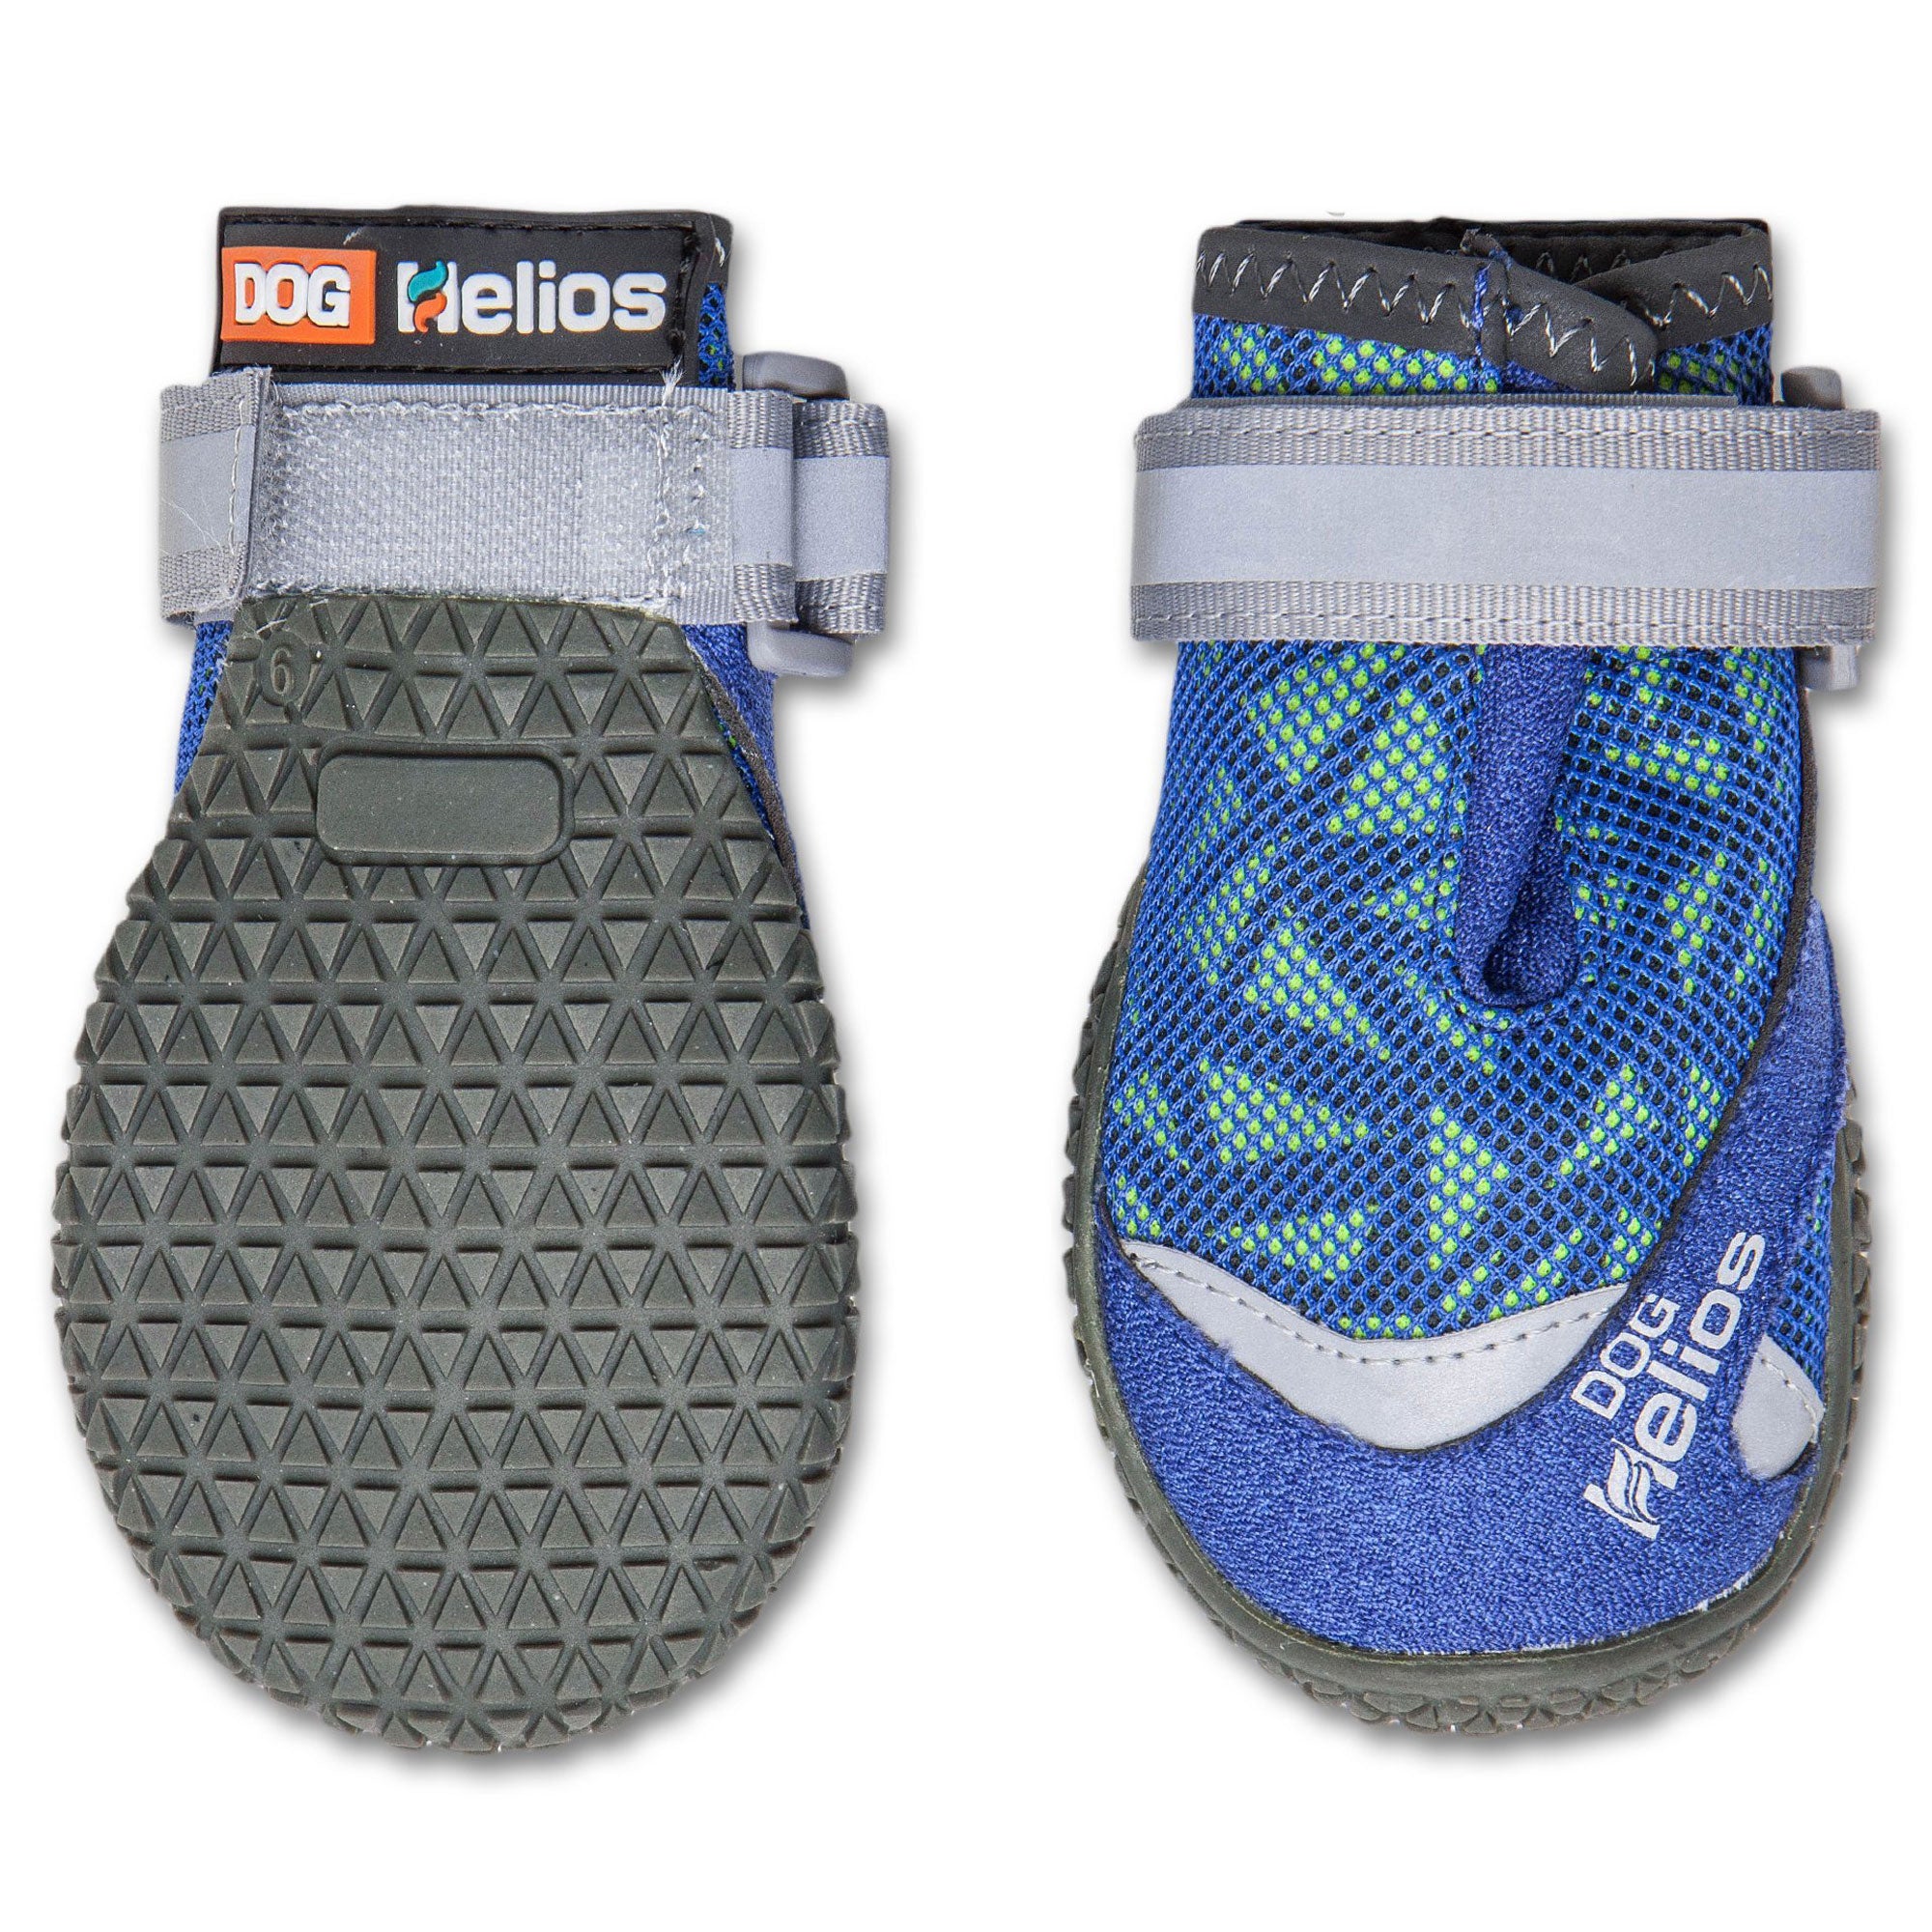 Dog Helios® Surface Performance Dog Shoes - Blue - X-Small